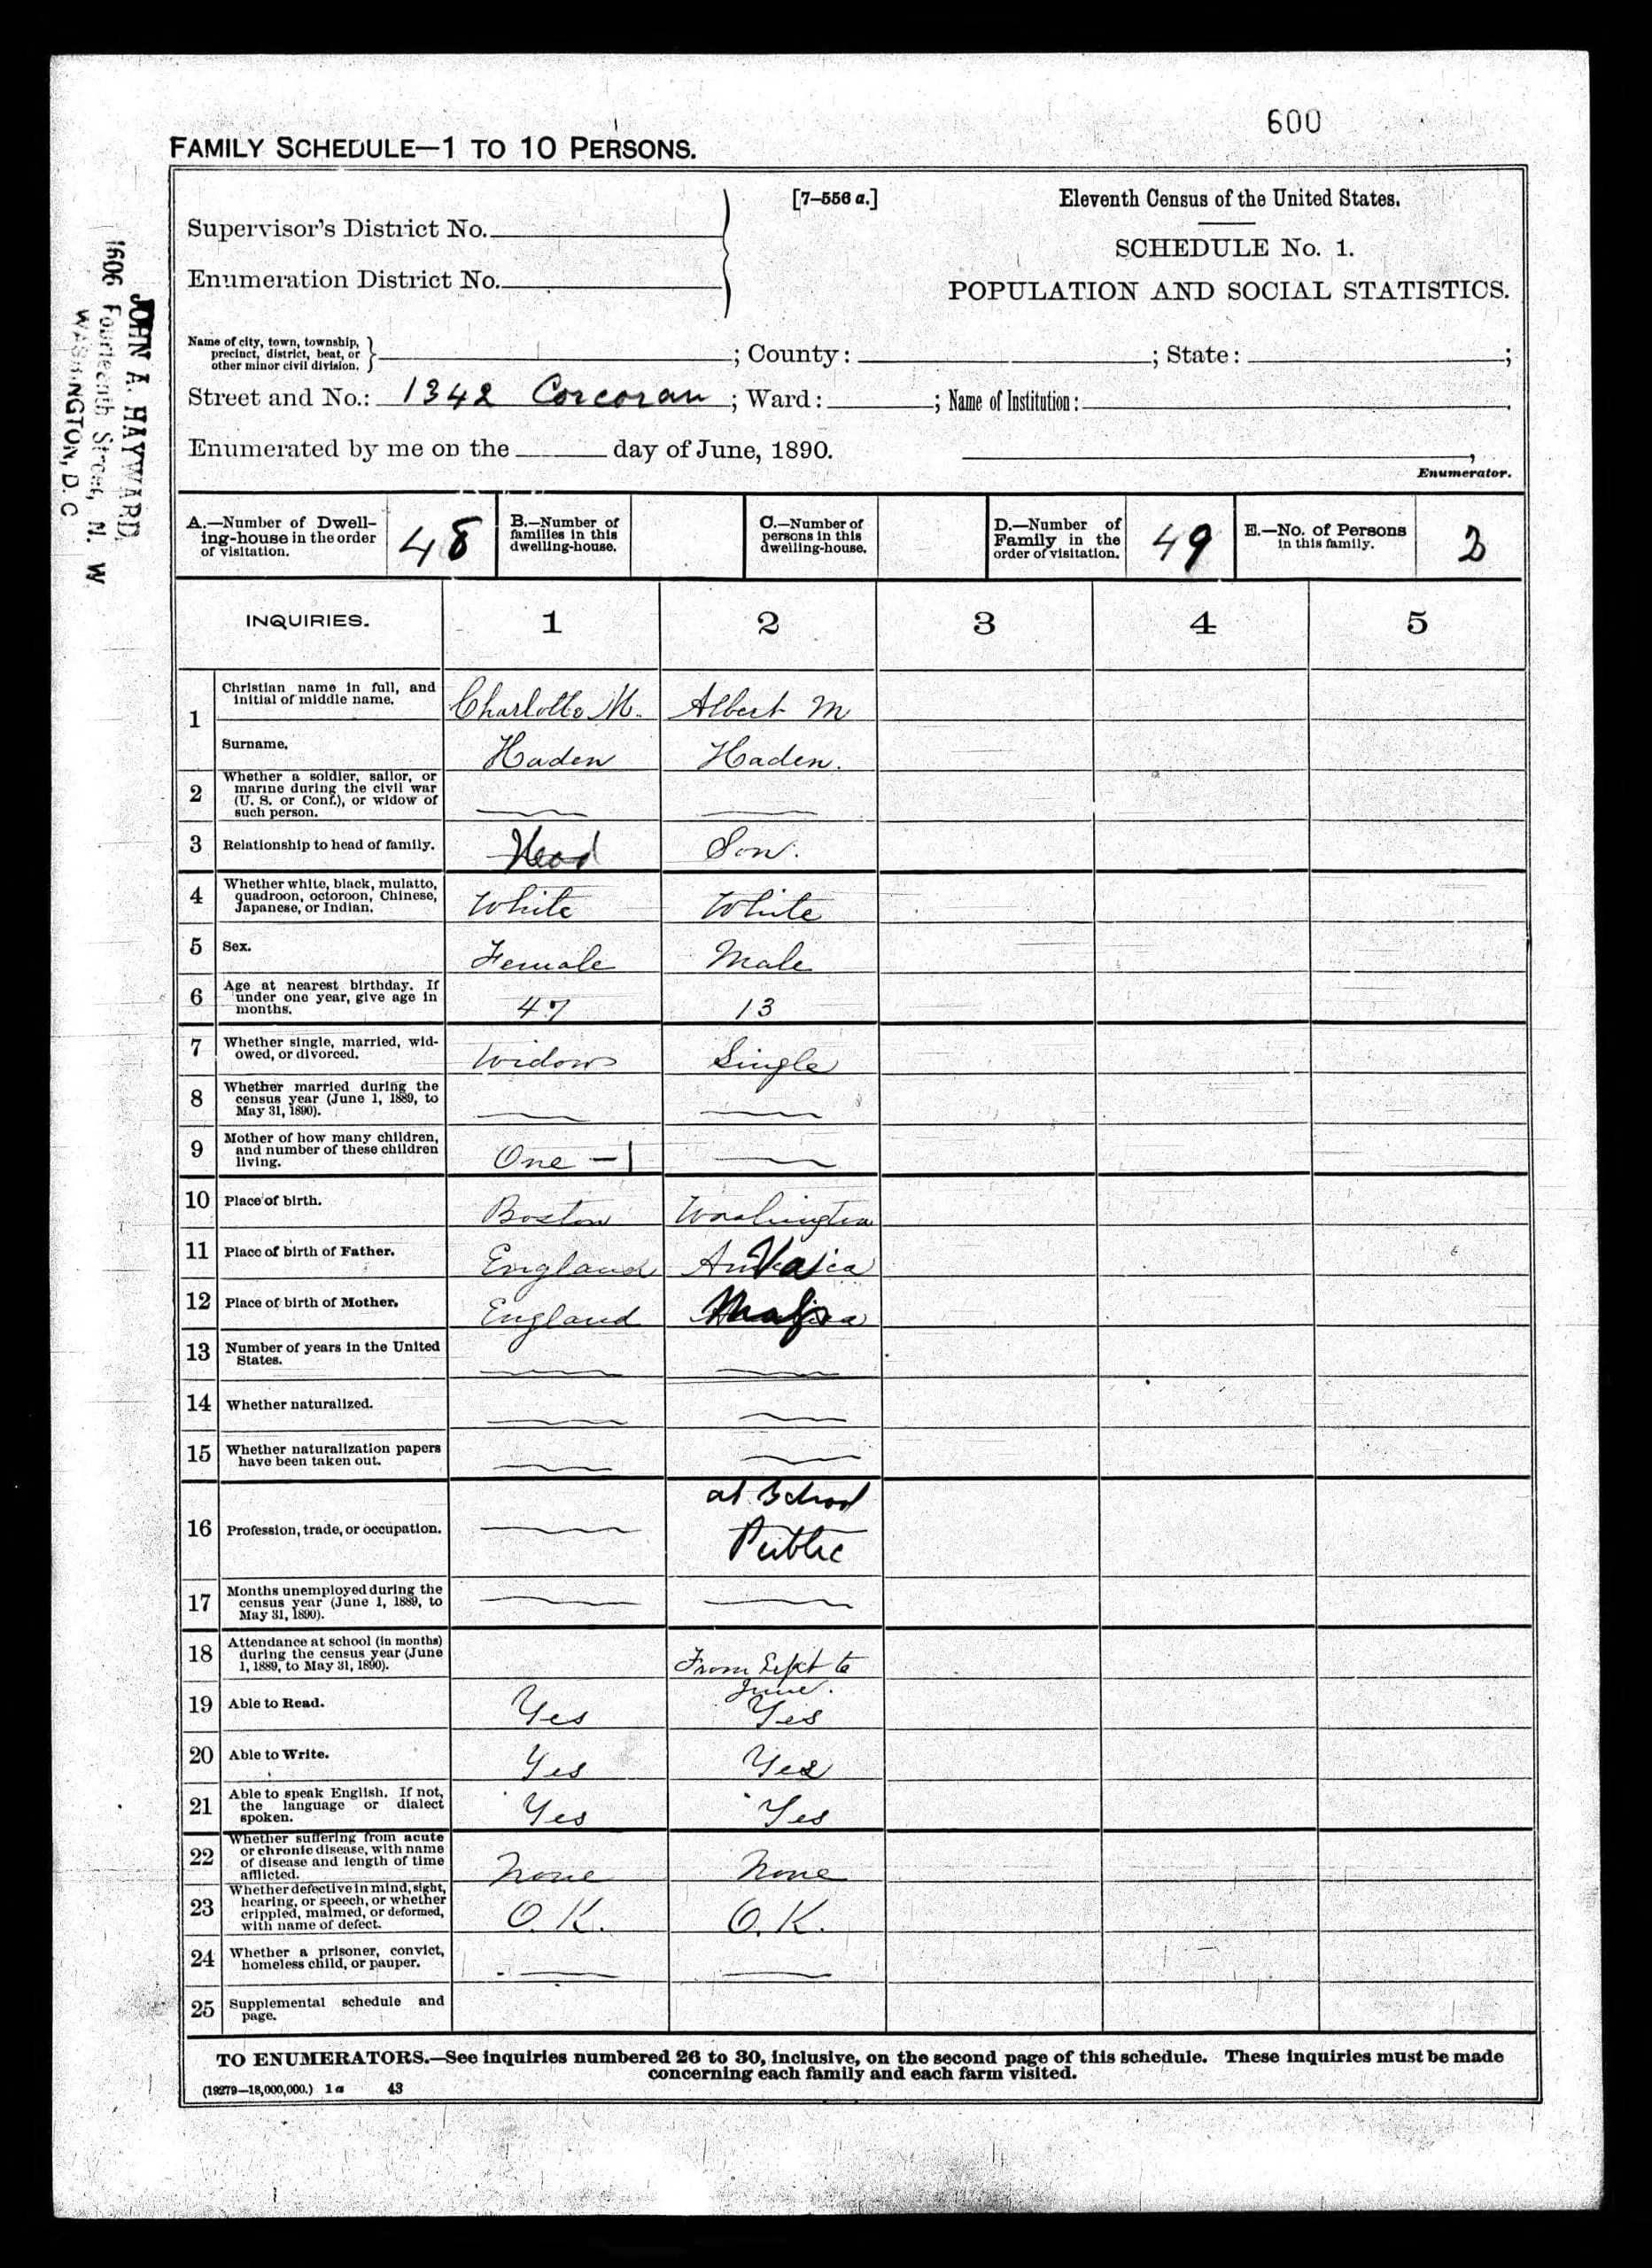 The Haden family in the 1890 U.S. Census (Ancestry.com)